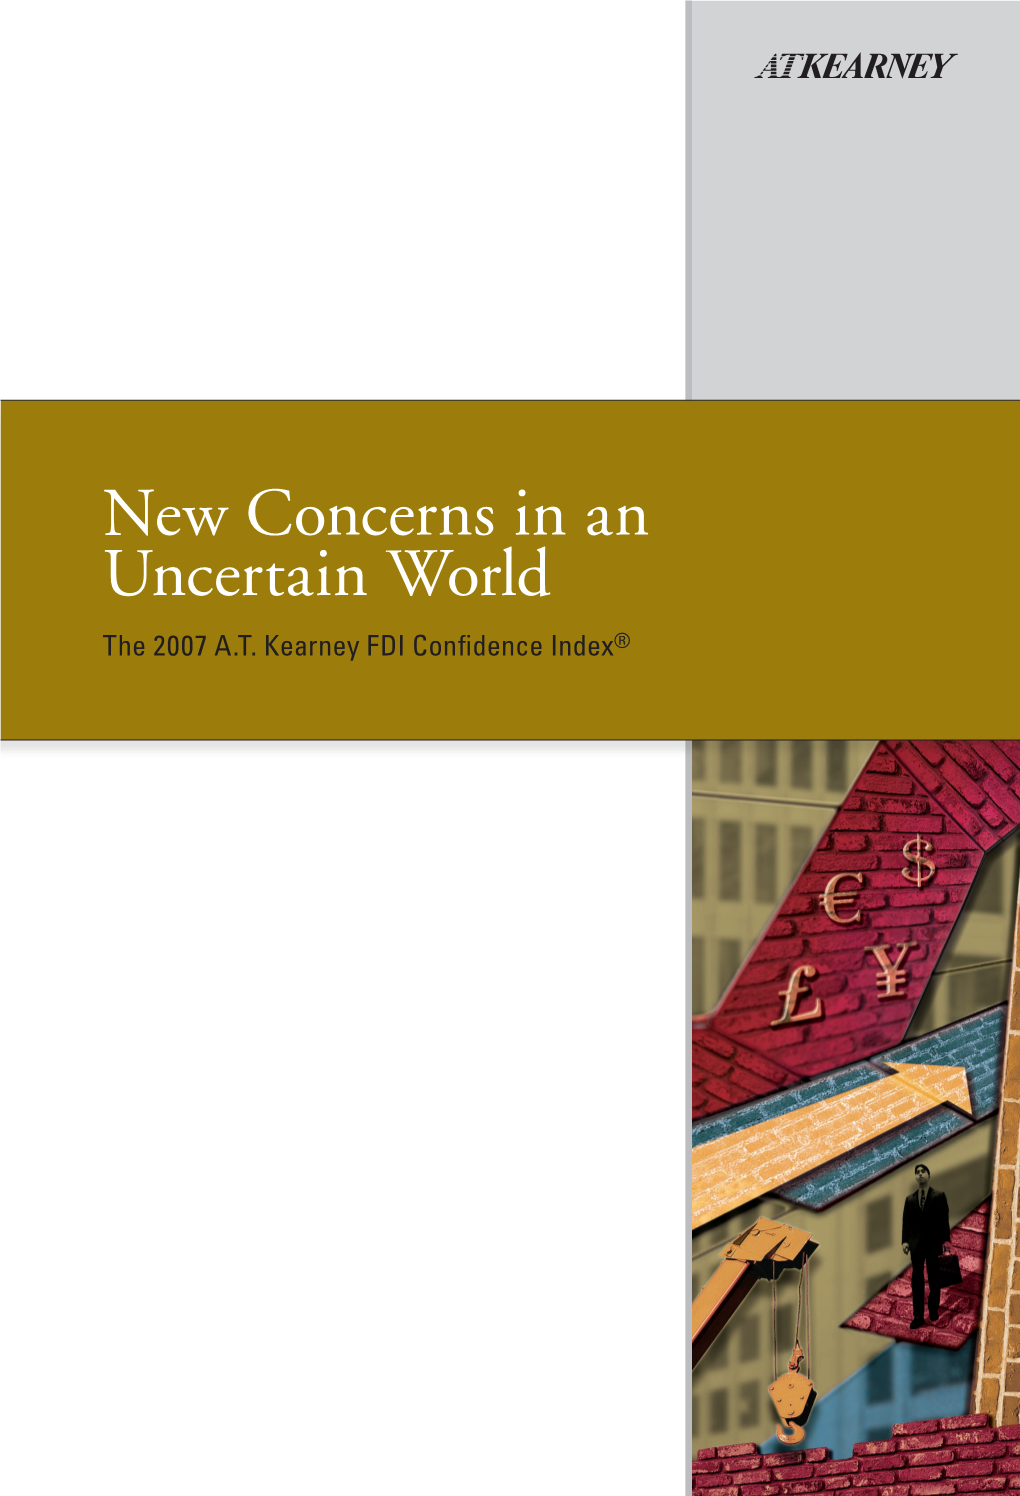 New Concerns in an Uncertain World the 2007 A.T